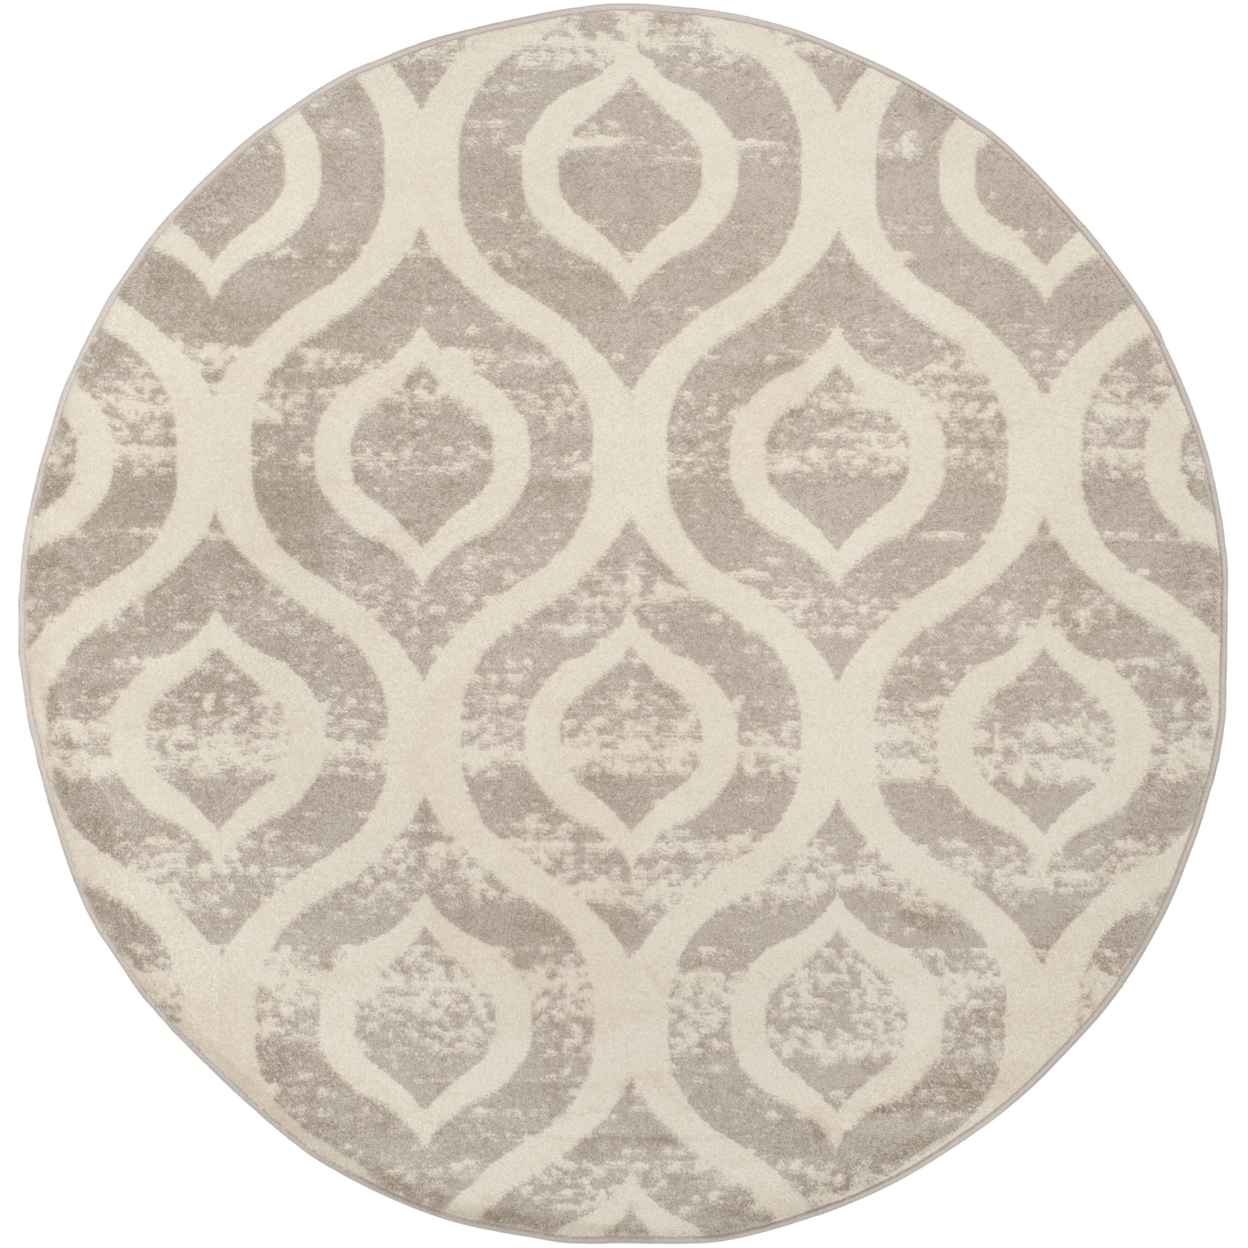 SAFAVIEH Amsterdam Collection AMS107A Ivory / Mauve Rug - 5' 1 Round